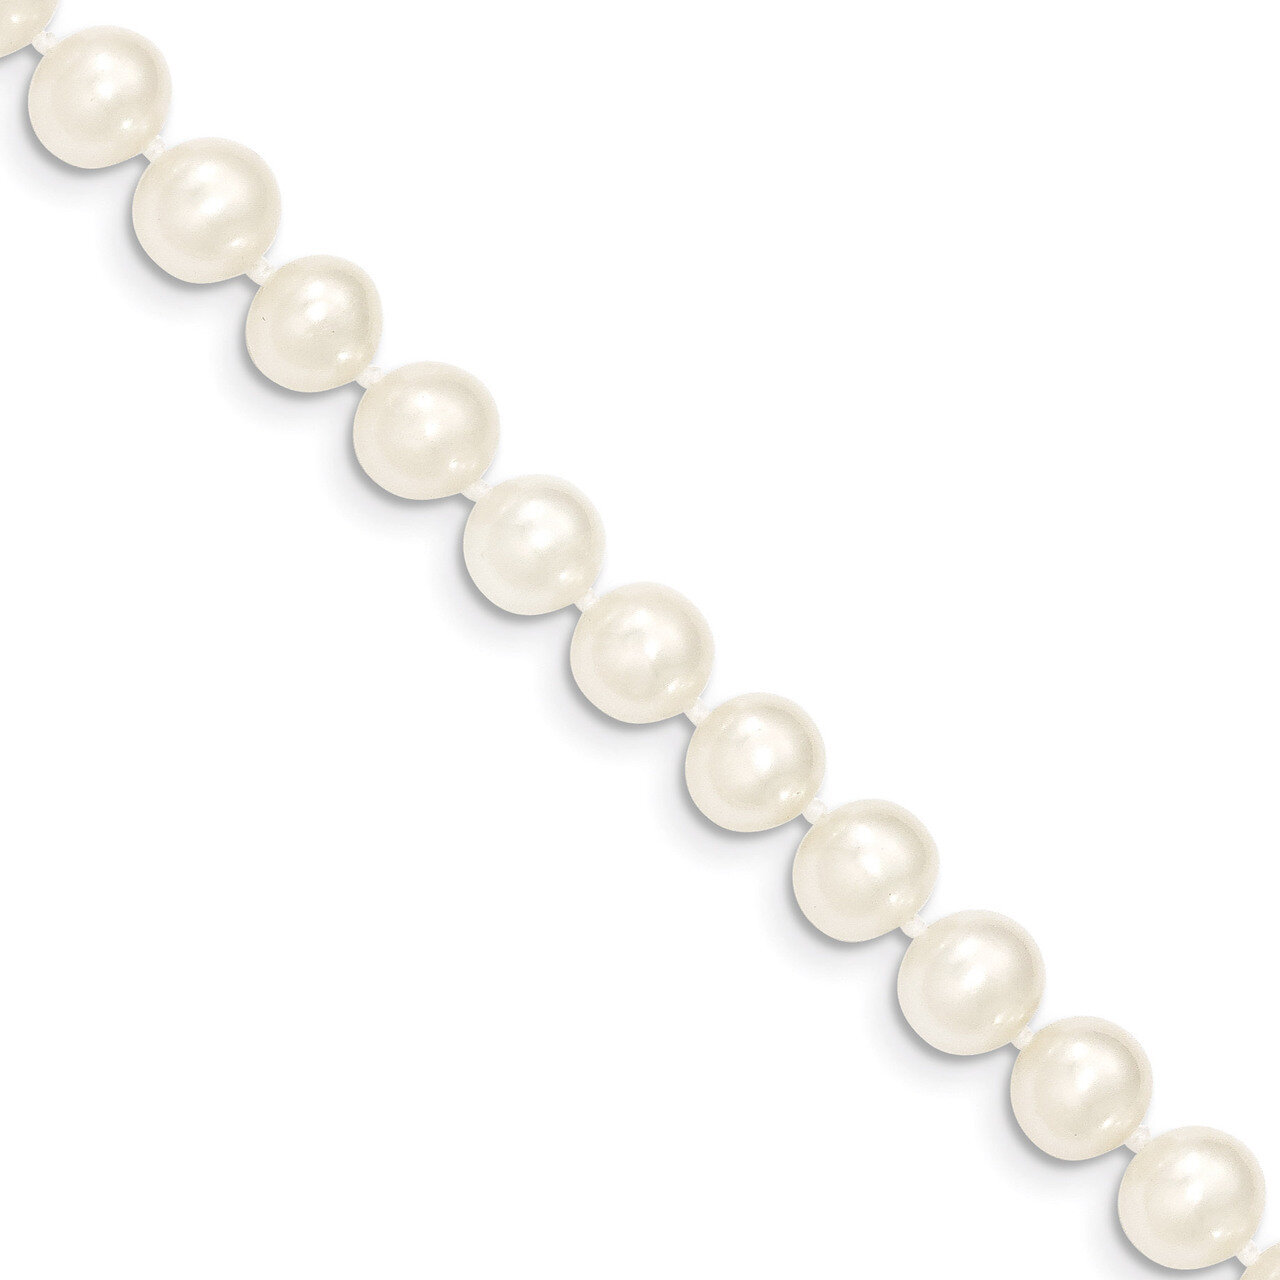 7-8mm White Cultured Near Round Pearl Necklace 24 Inch 14k Gold WPN070-24